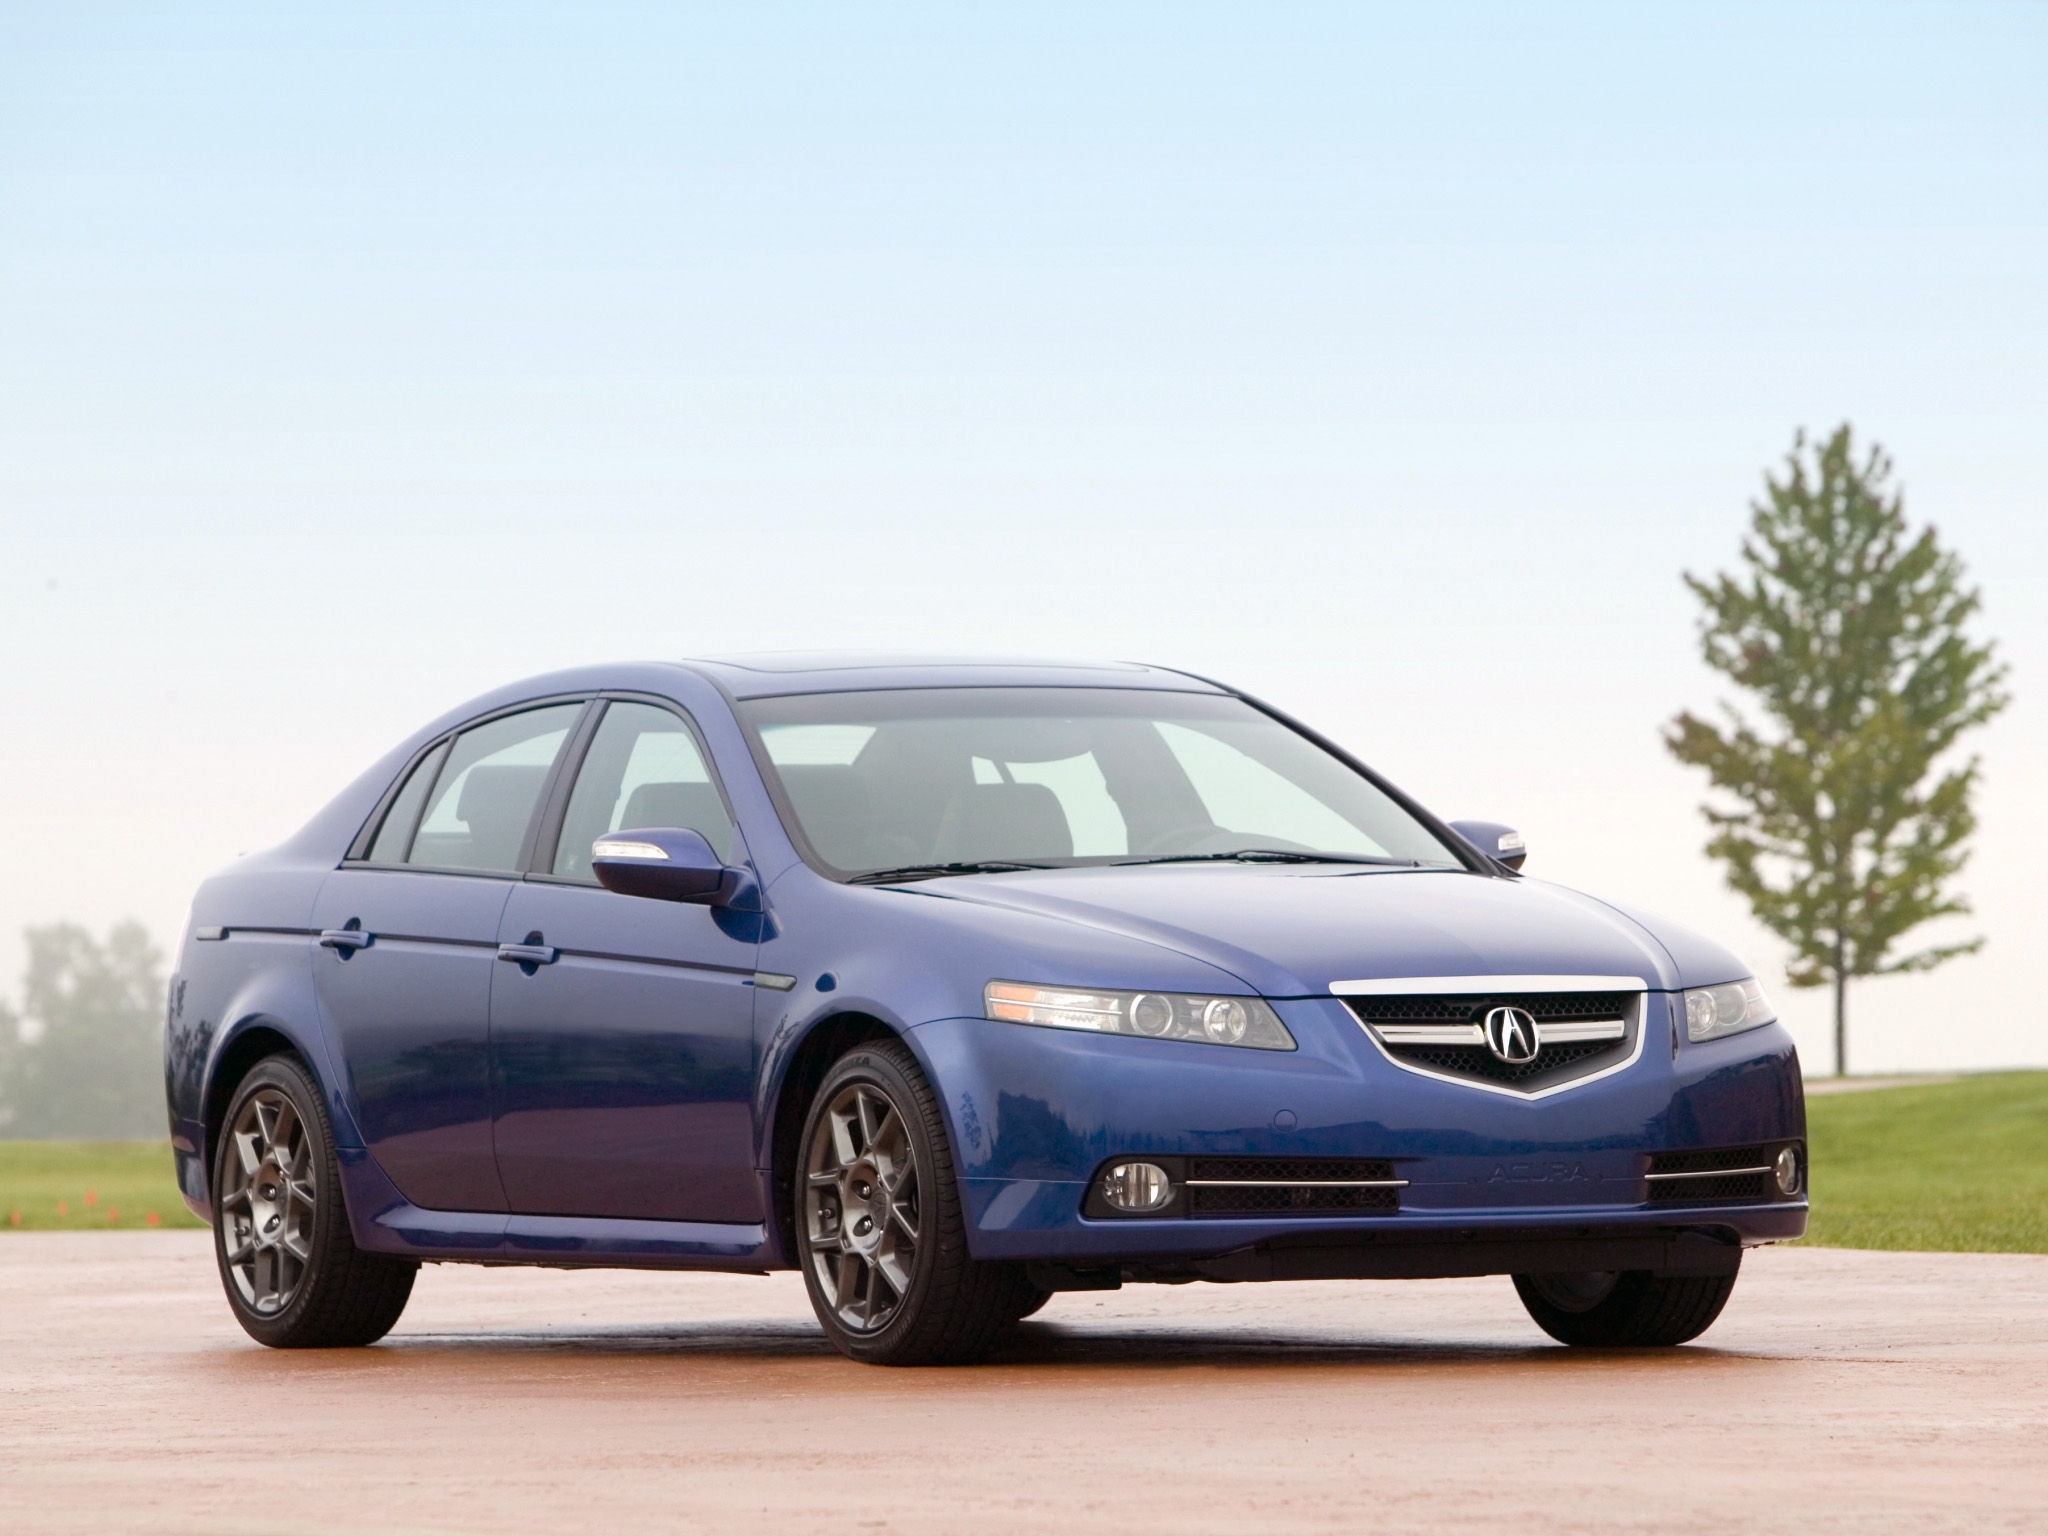 auto, nature, grass, sky, acura, cars, blue, wood, tree, side view, style, akura, tl, 2007 High Definition image